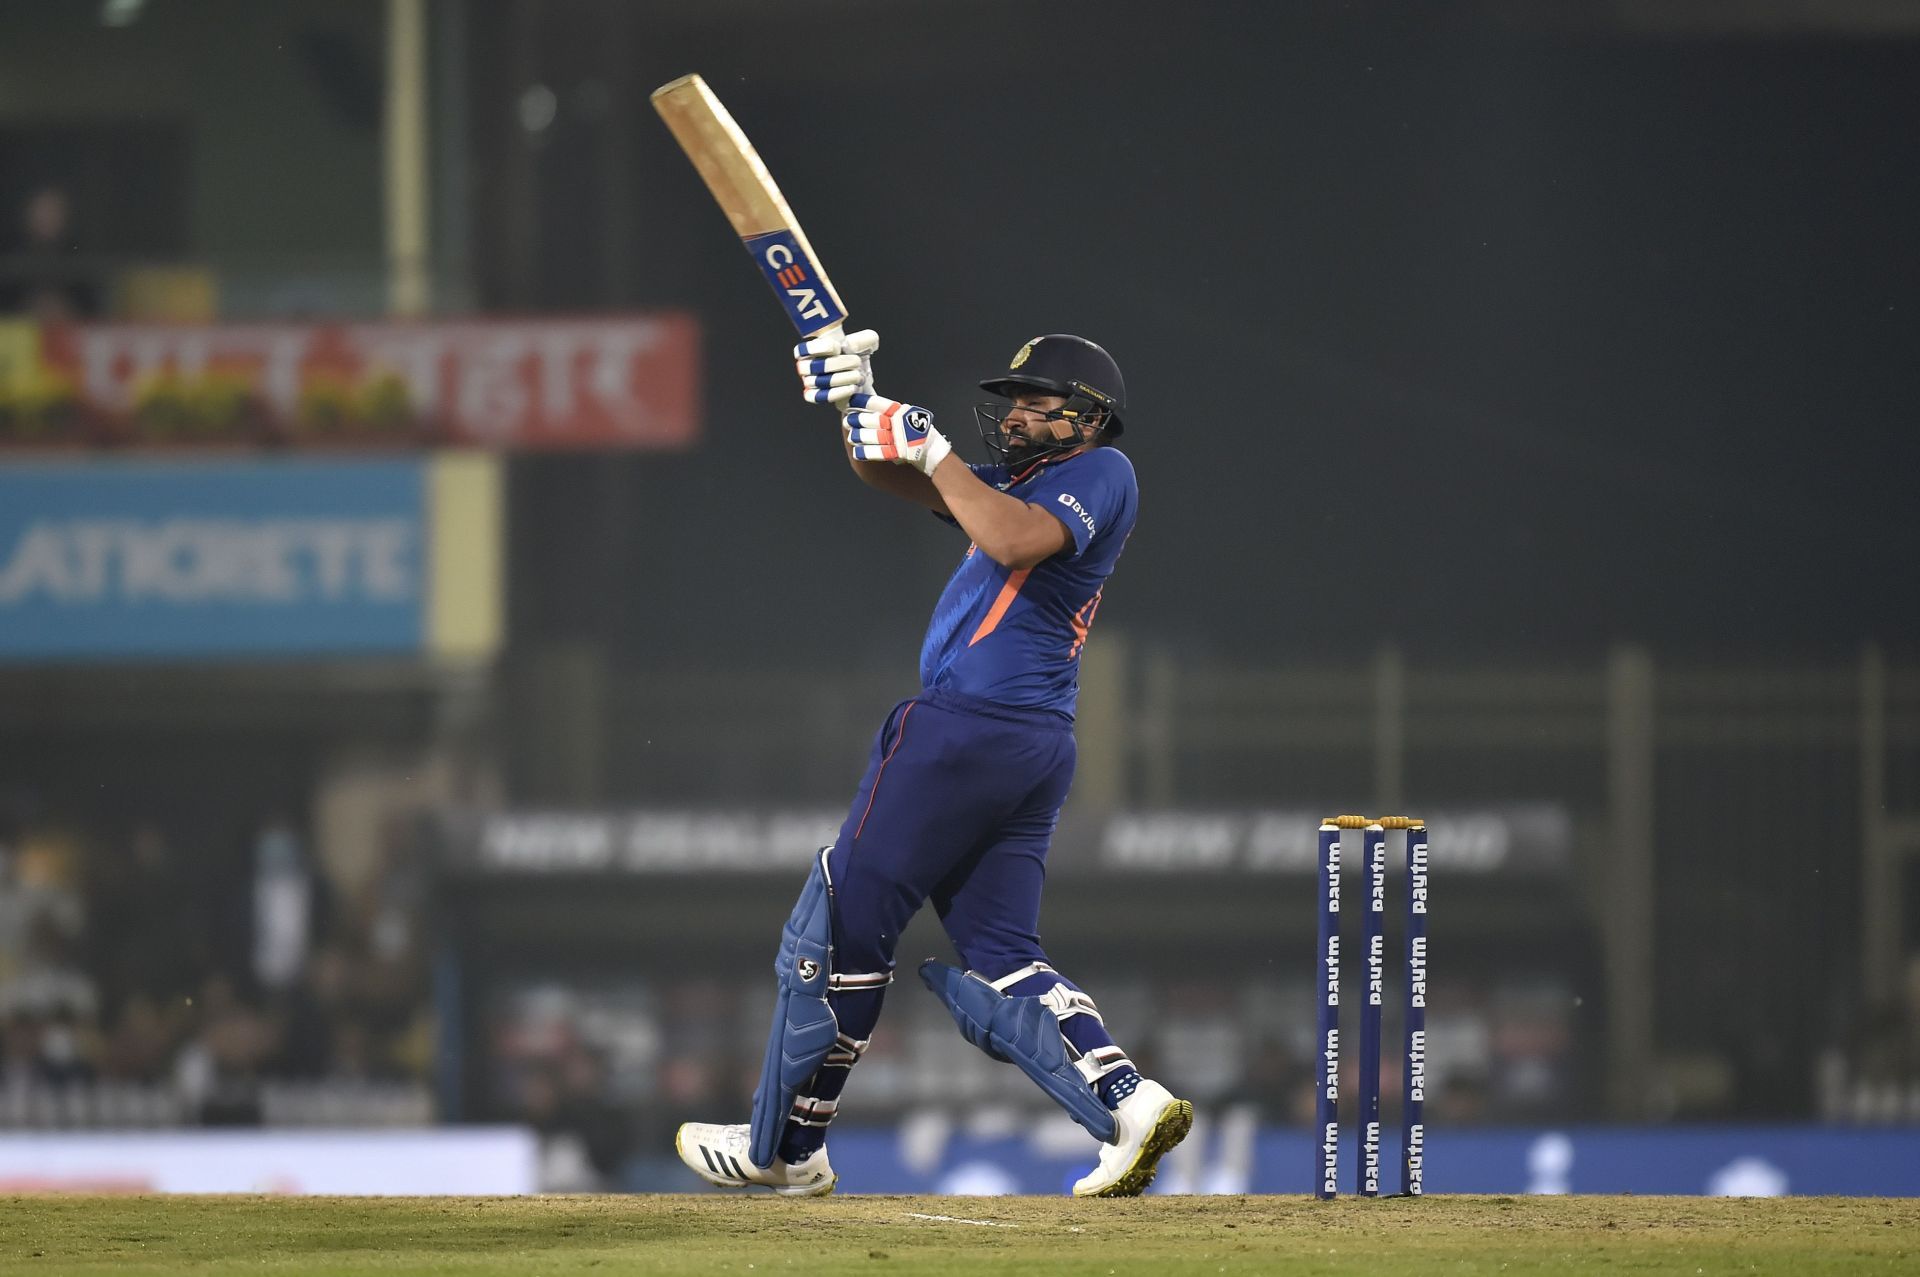 Rohit Sharma was it his dominating best during the India-New Zealand T20I series